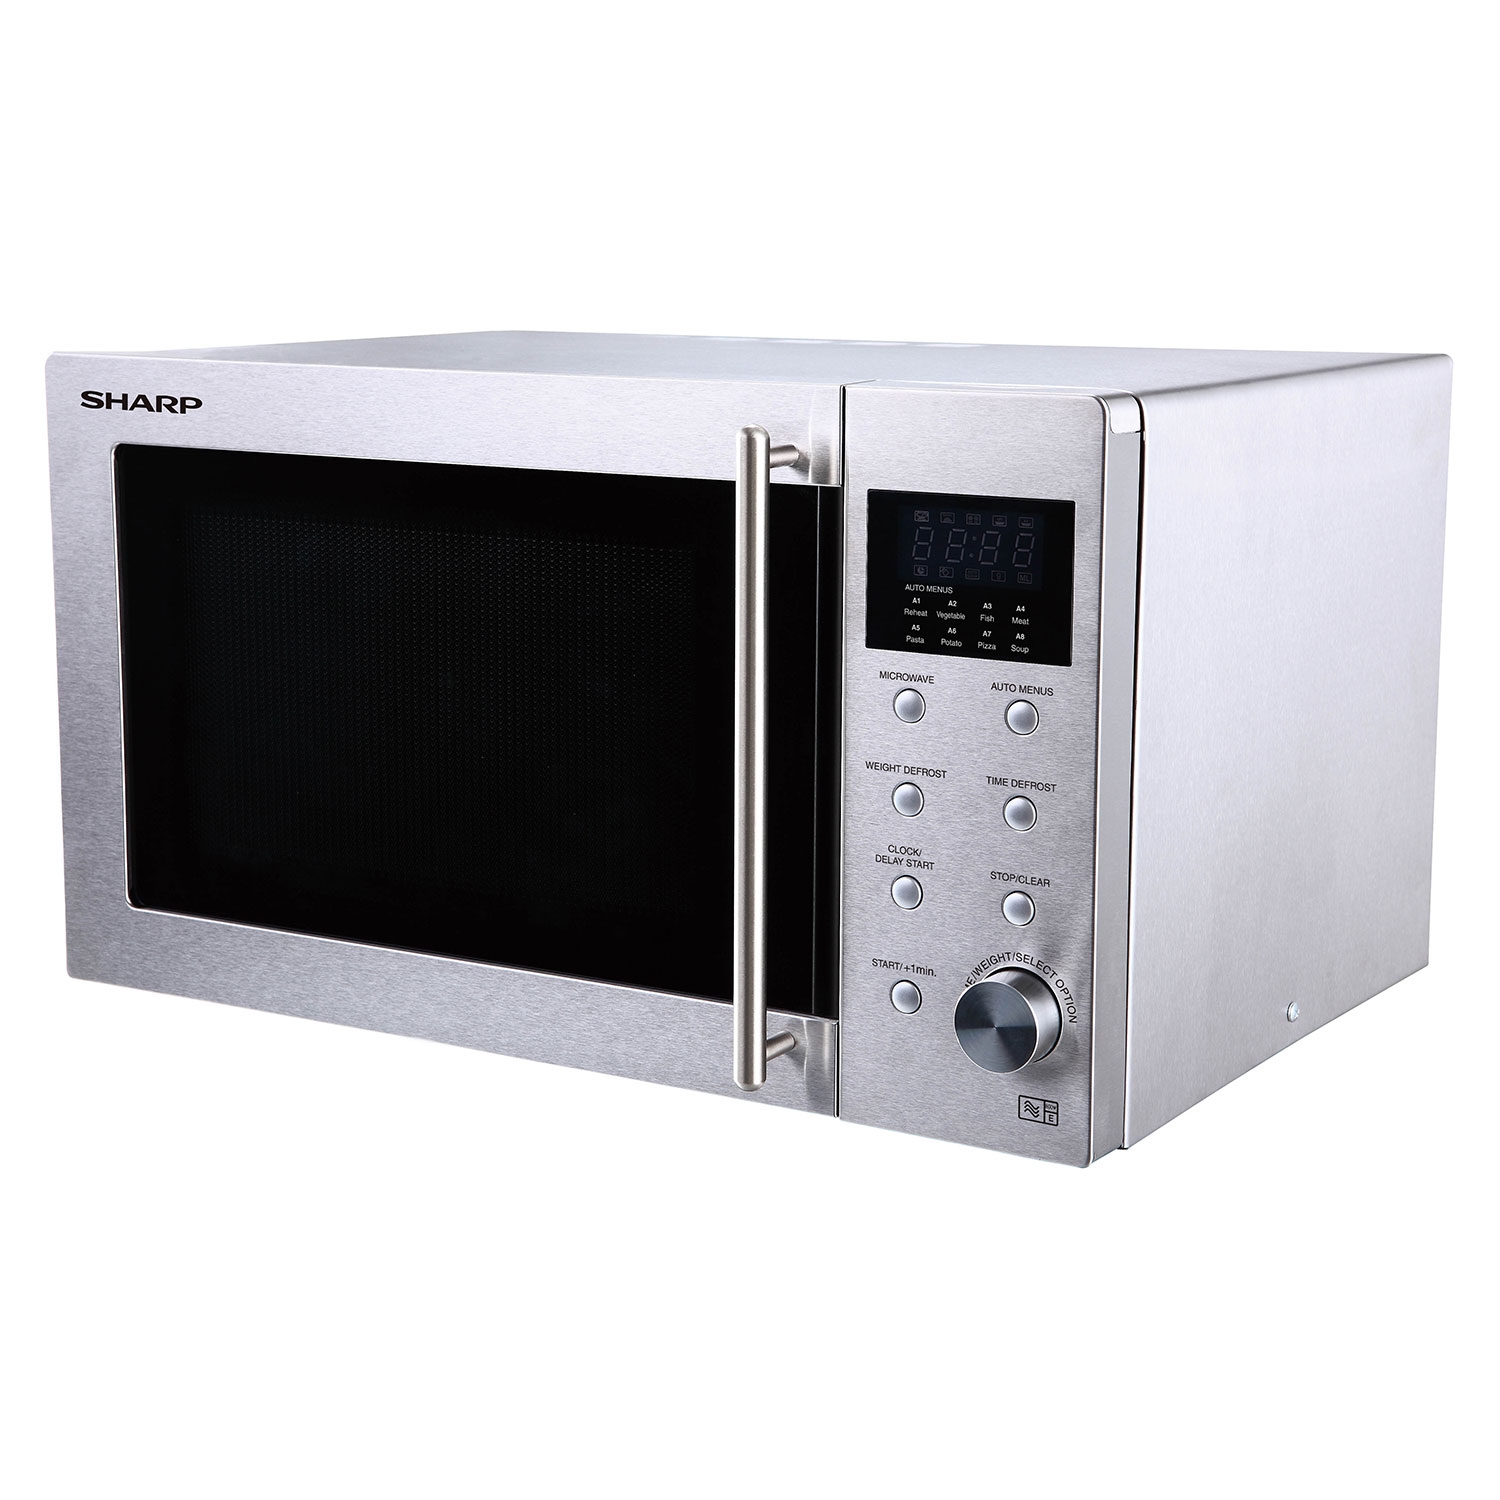 Sharp 23 Litre Solo Microwave - Stainless Steel - 0